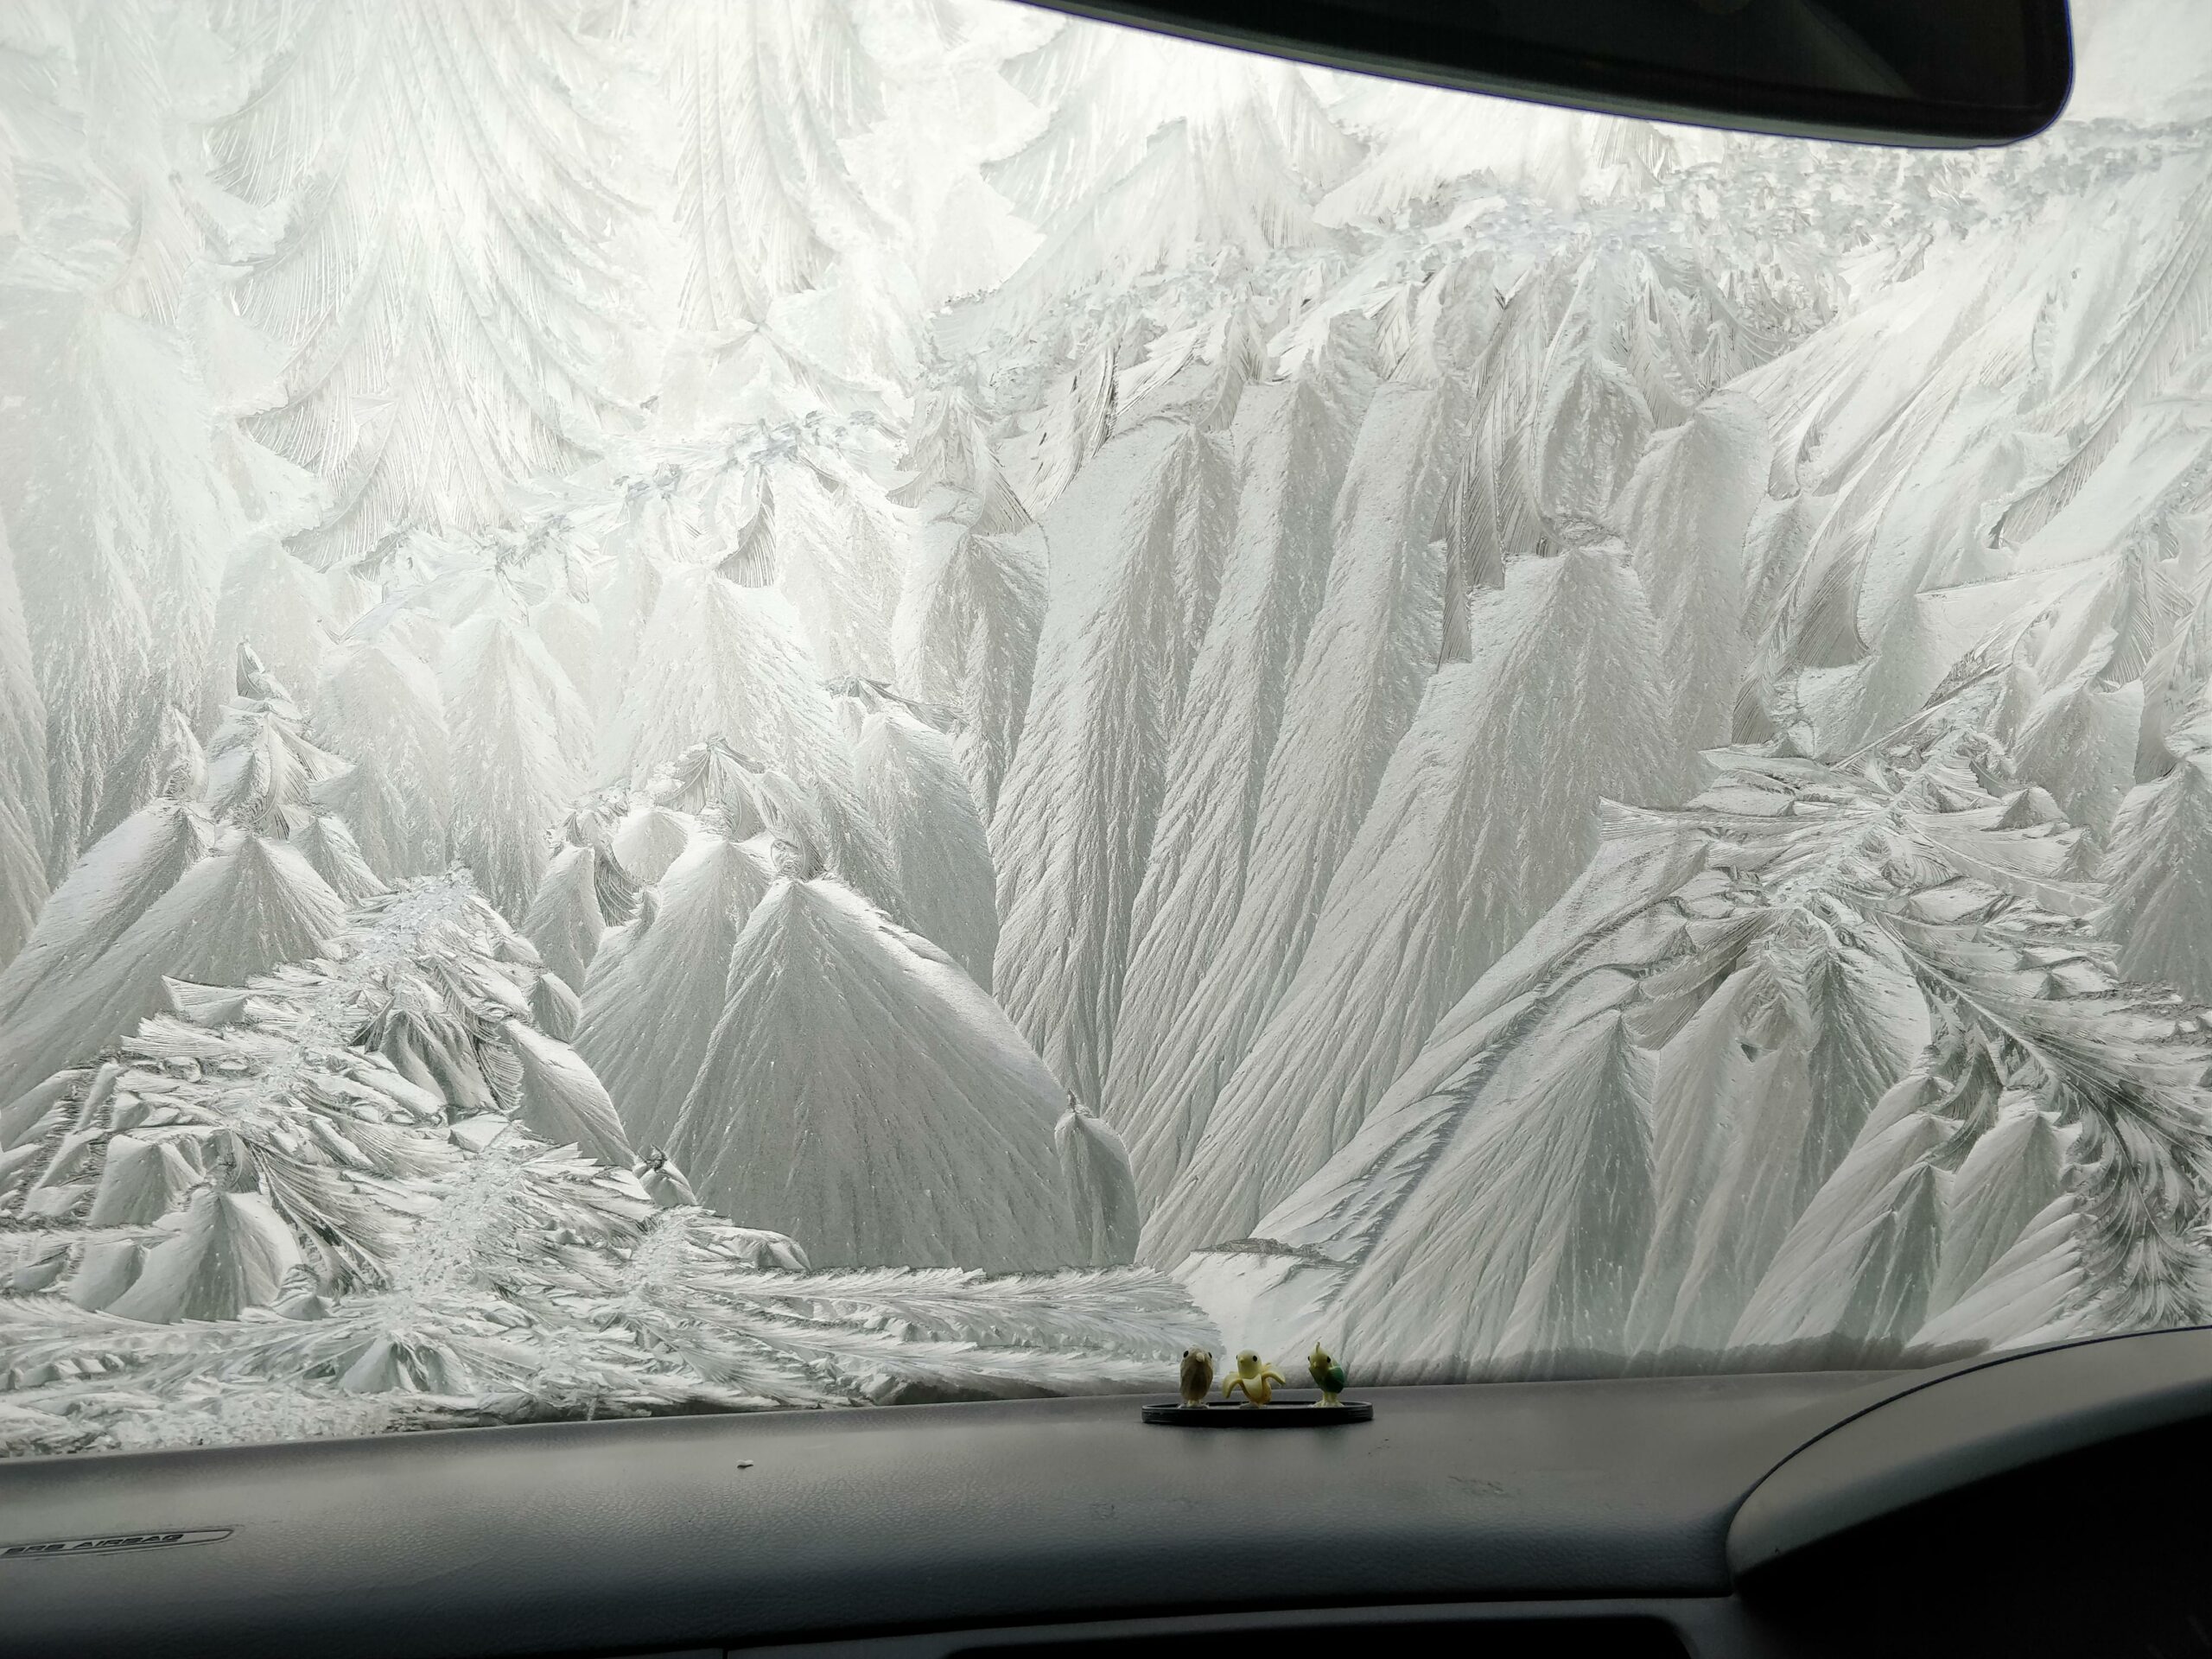 ice on a frozen windshield that looks like an icy mountain landscape